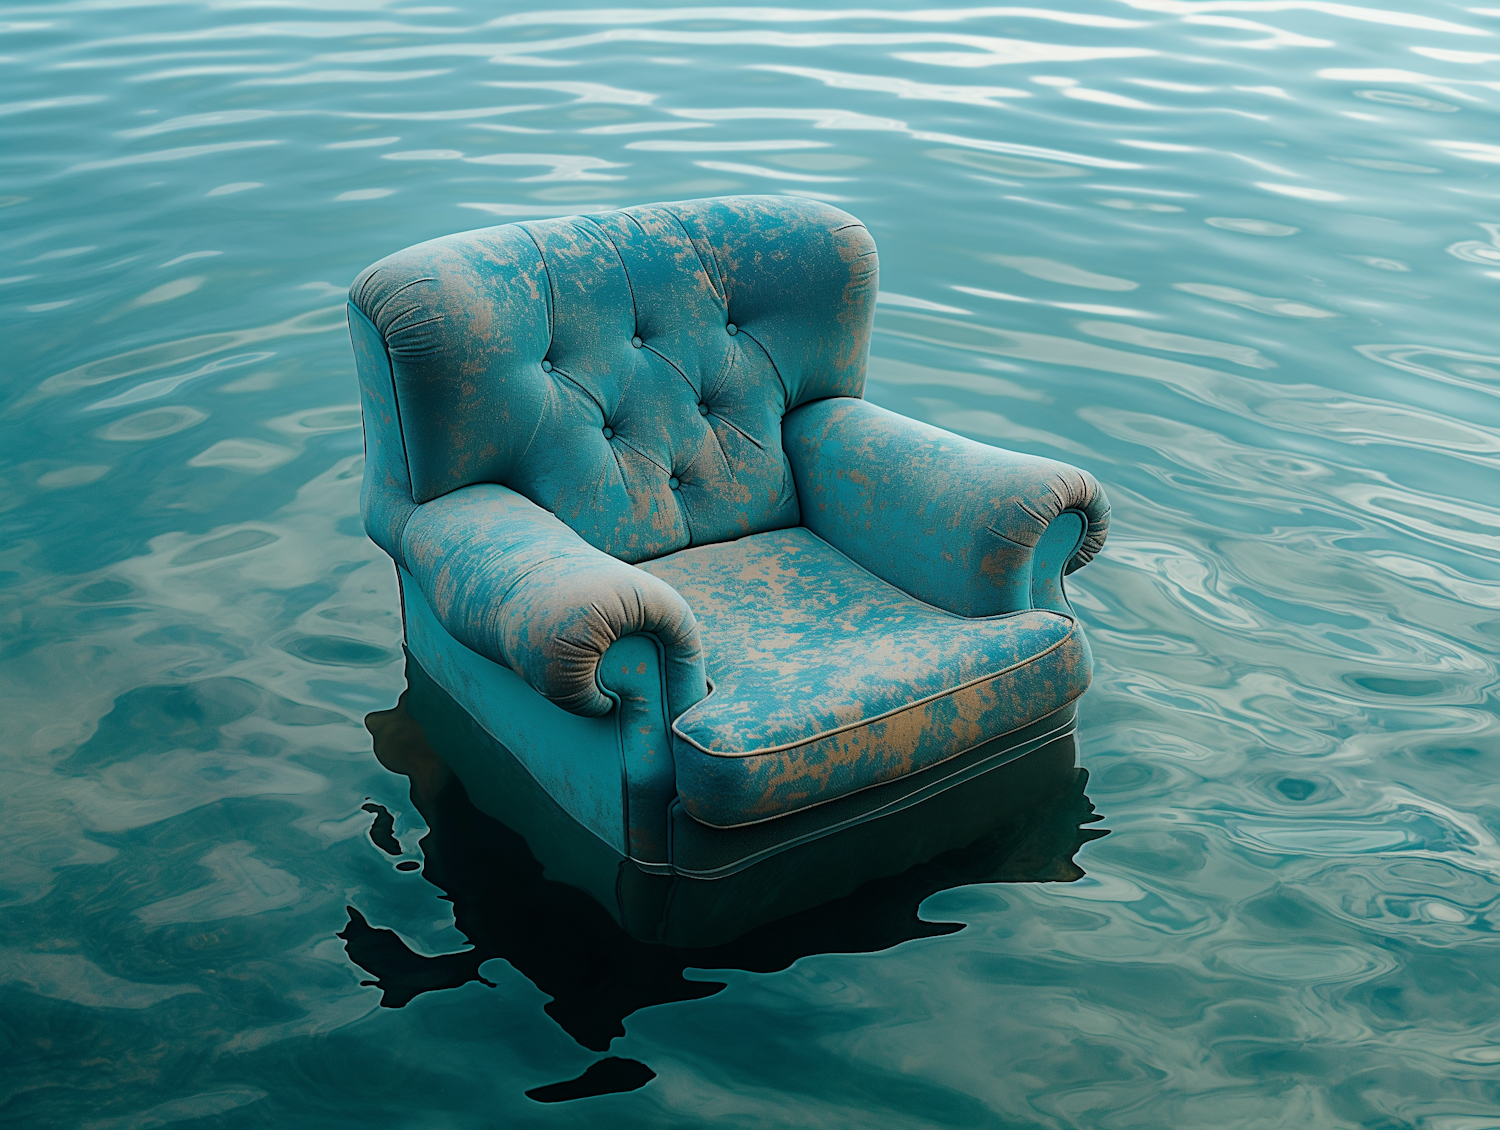 Surreal Floating Armchair On Water